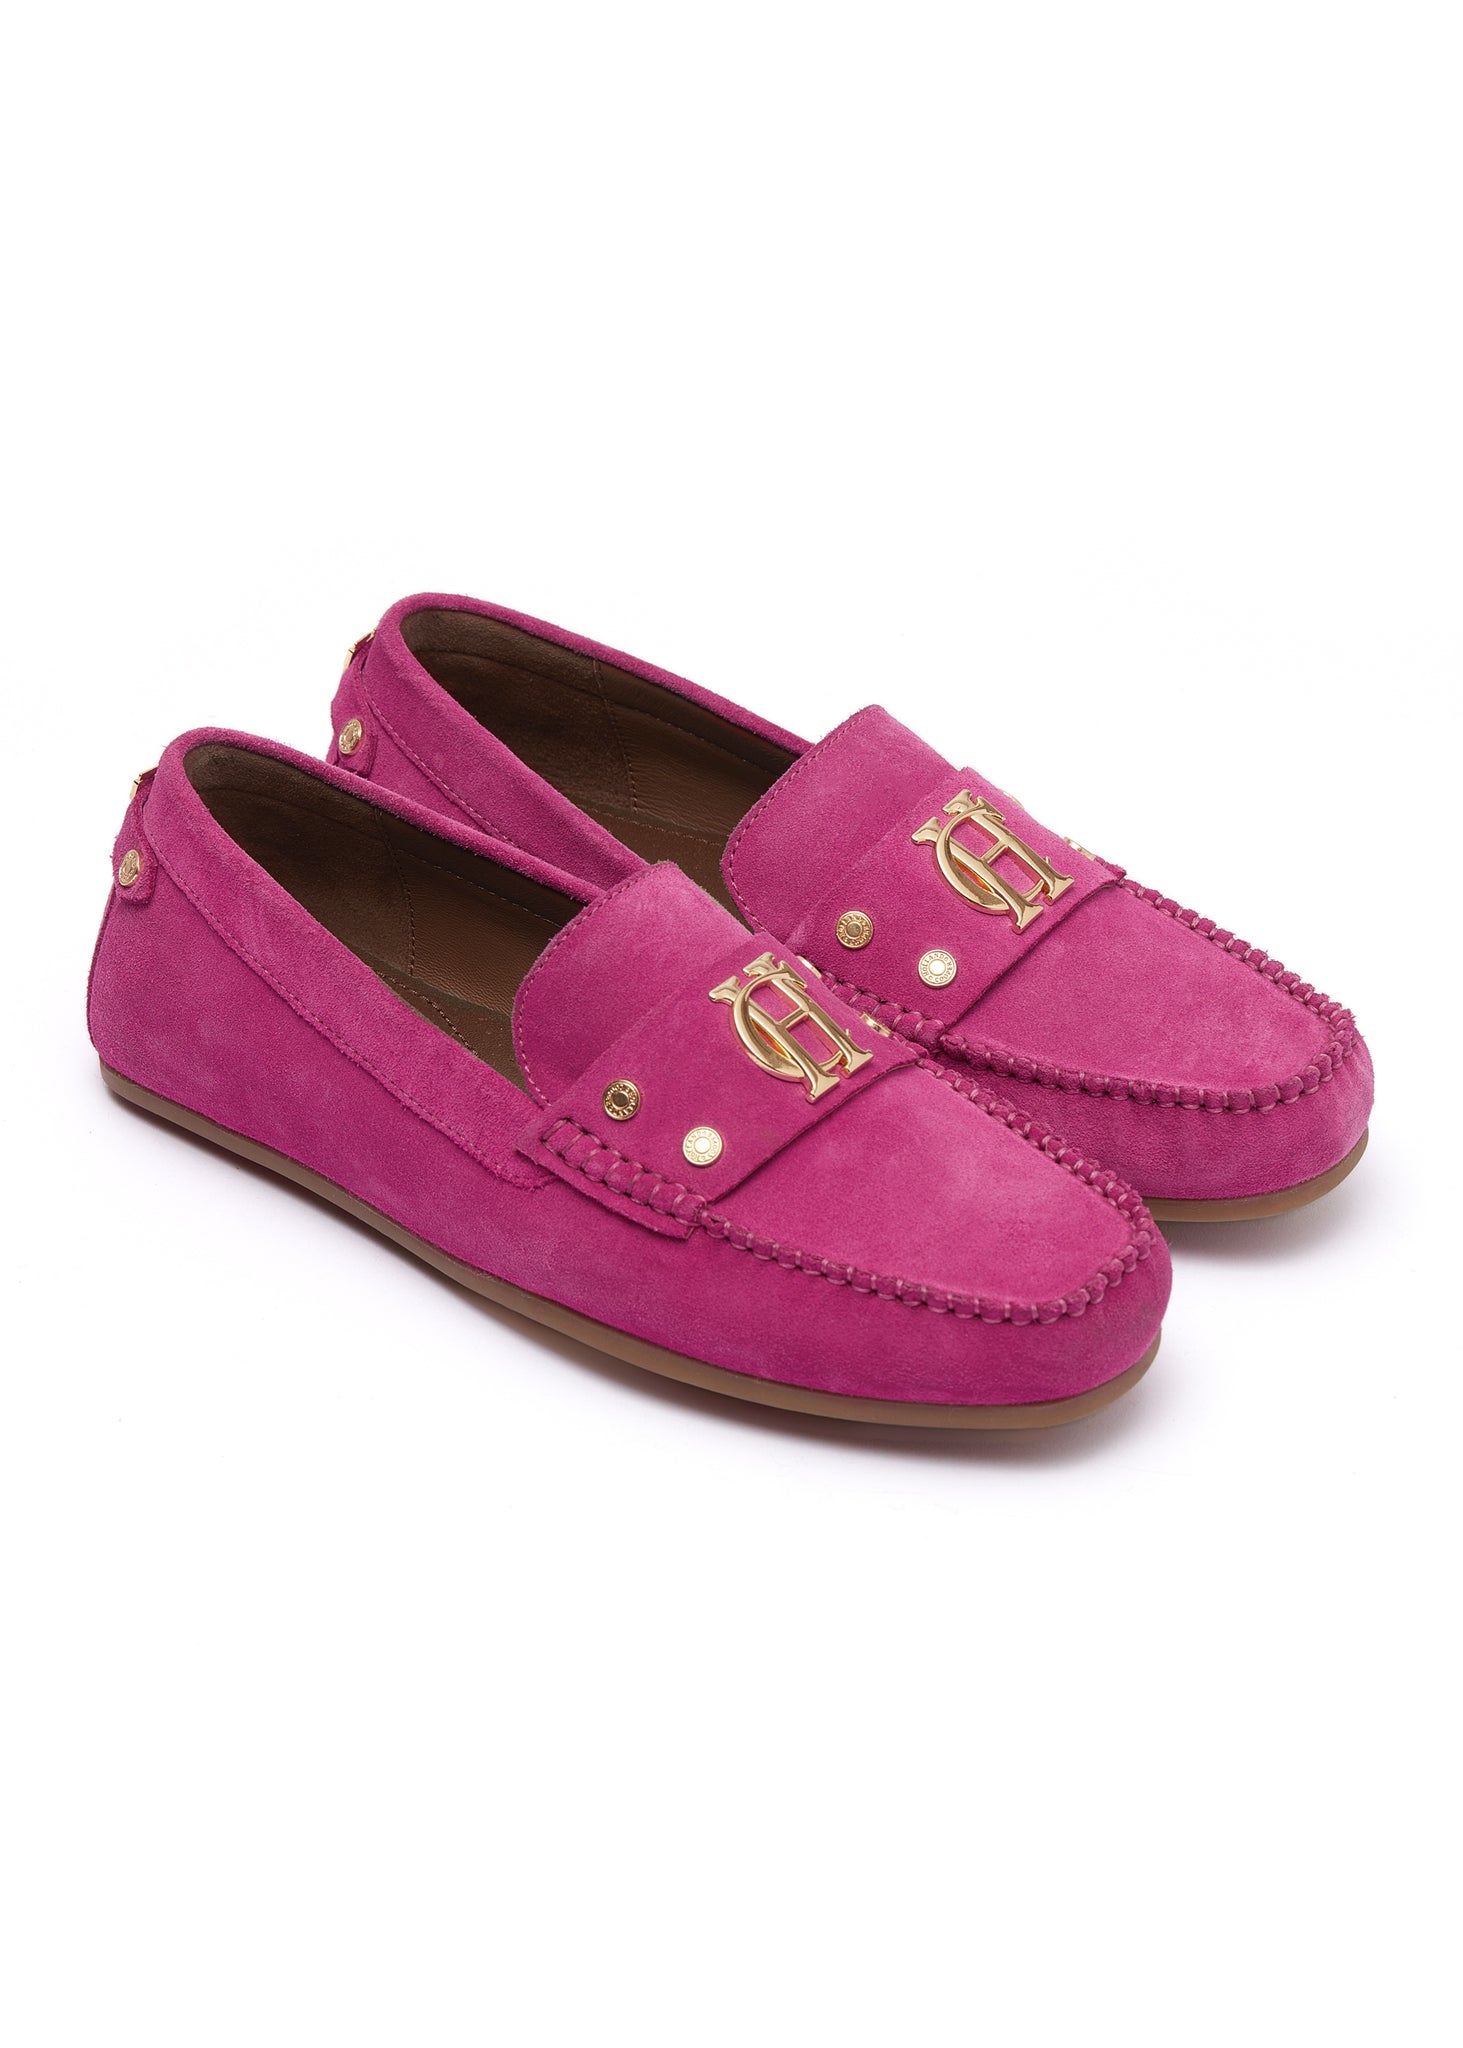 bright pink suede loafers with a leather sole and top stitching details and gold hardware